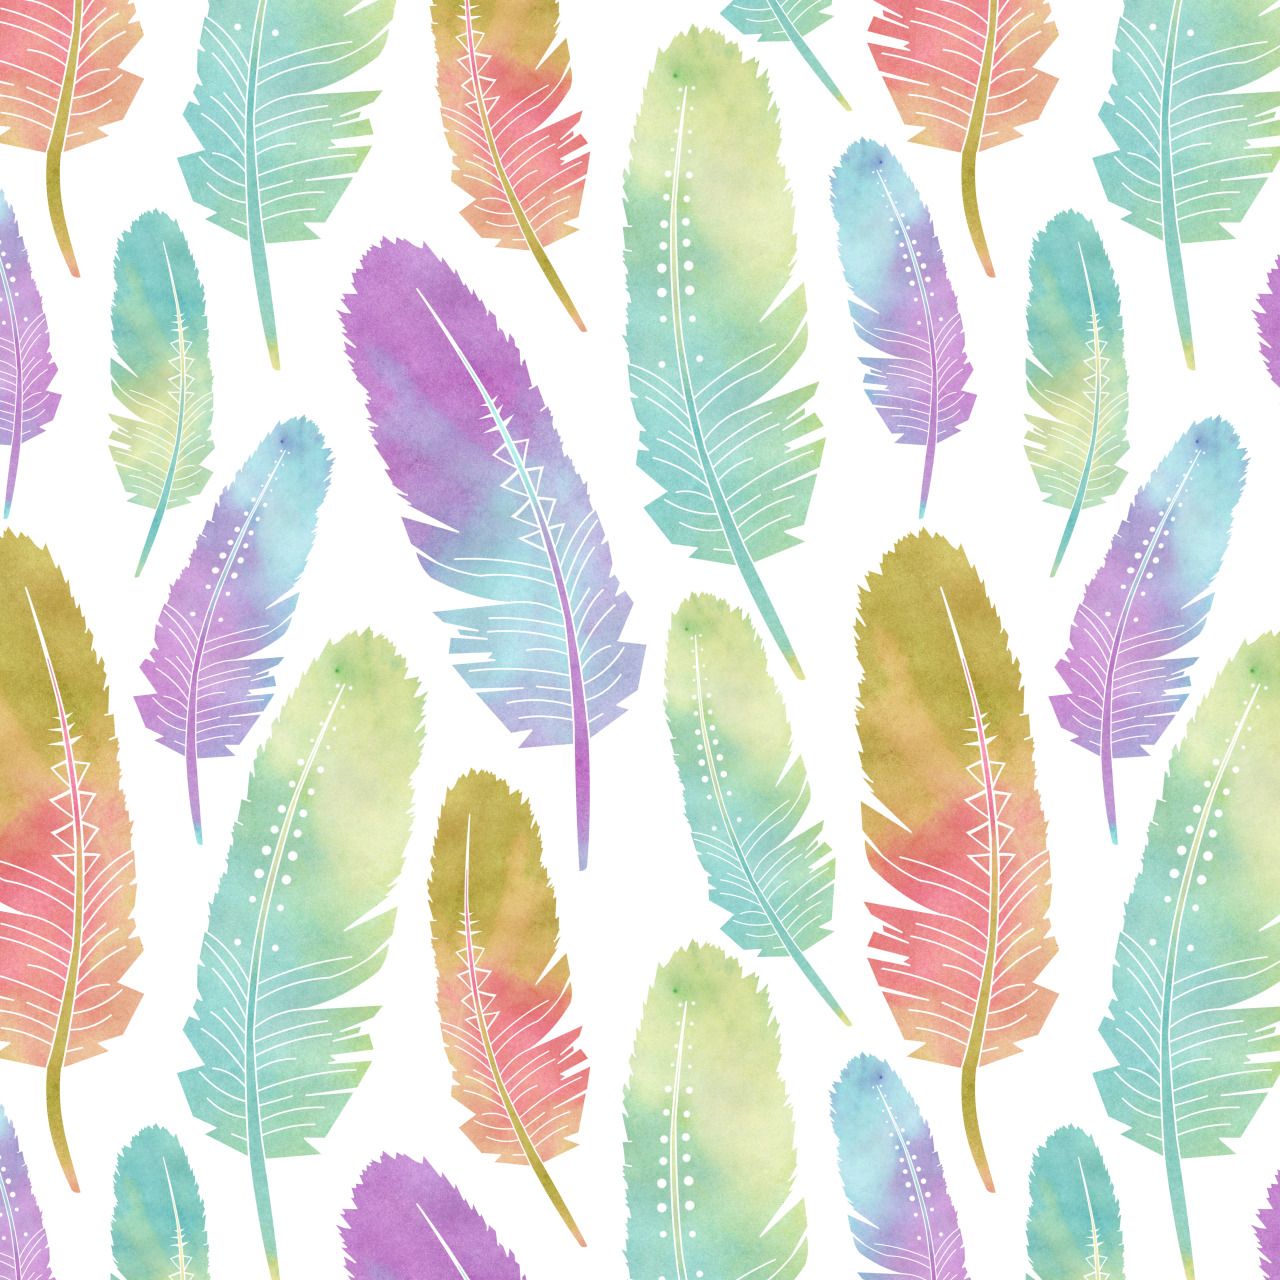 Feather Tumblr Wallpapers